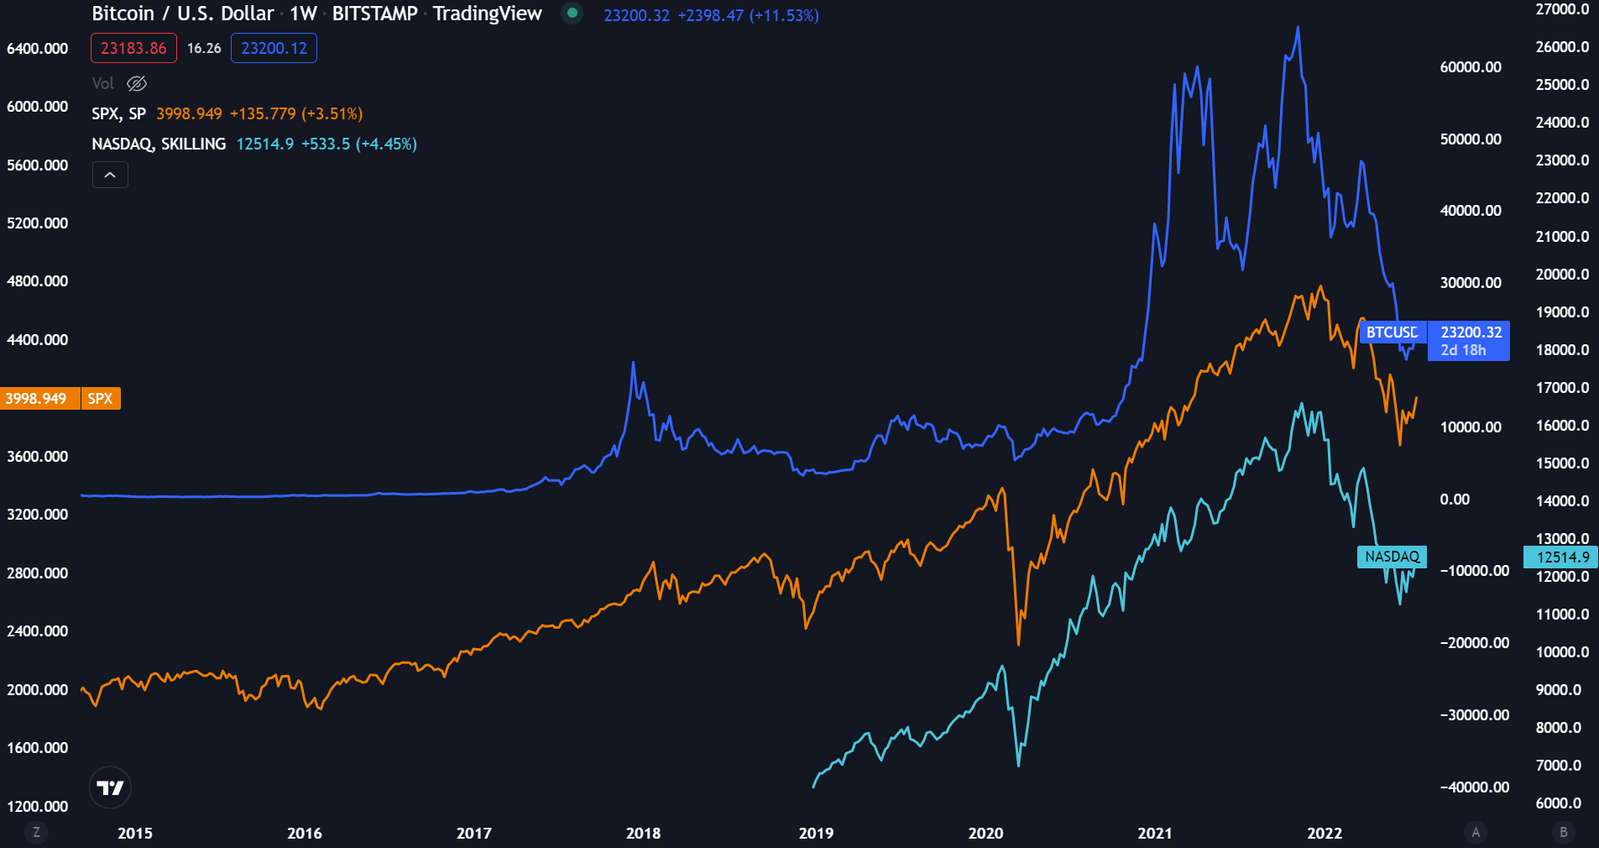 Bitcoin compared against S&P 500 and Nasdaq 100 index